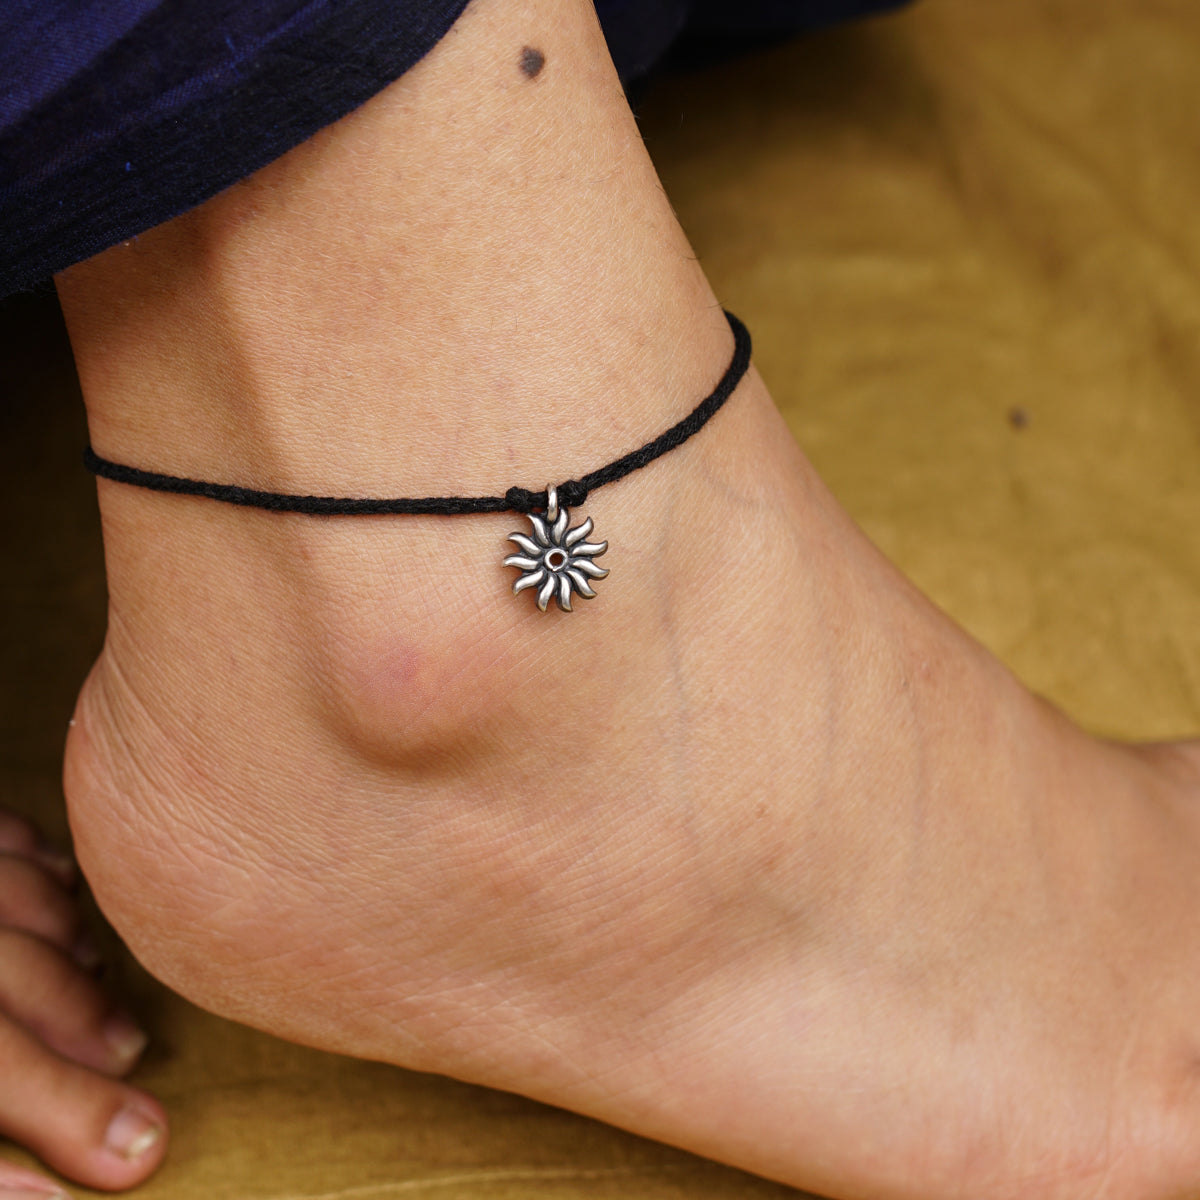 a close up of a person's foot with a flower charm on it